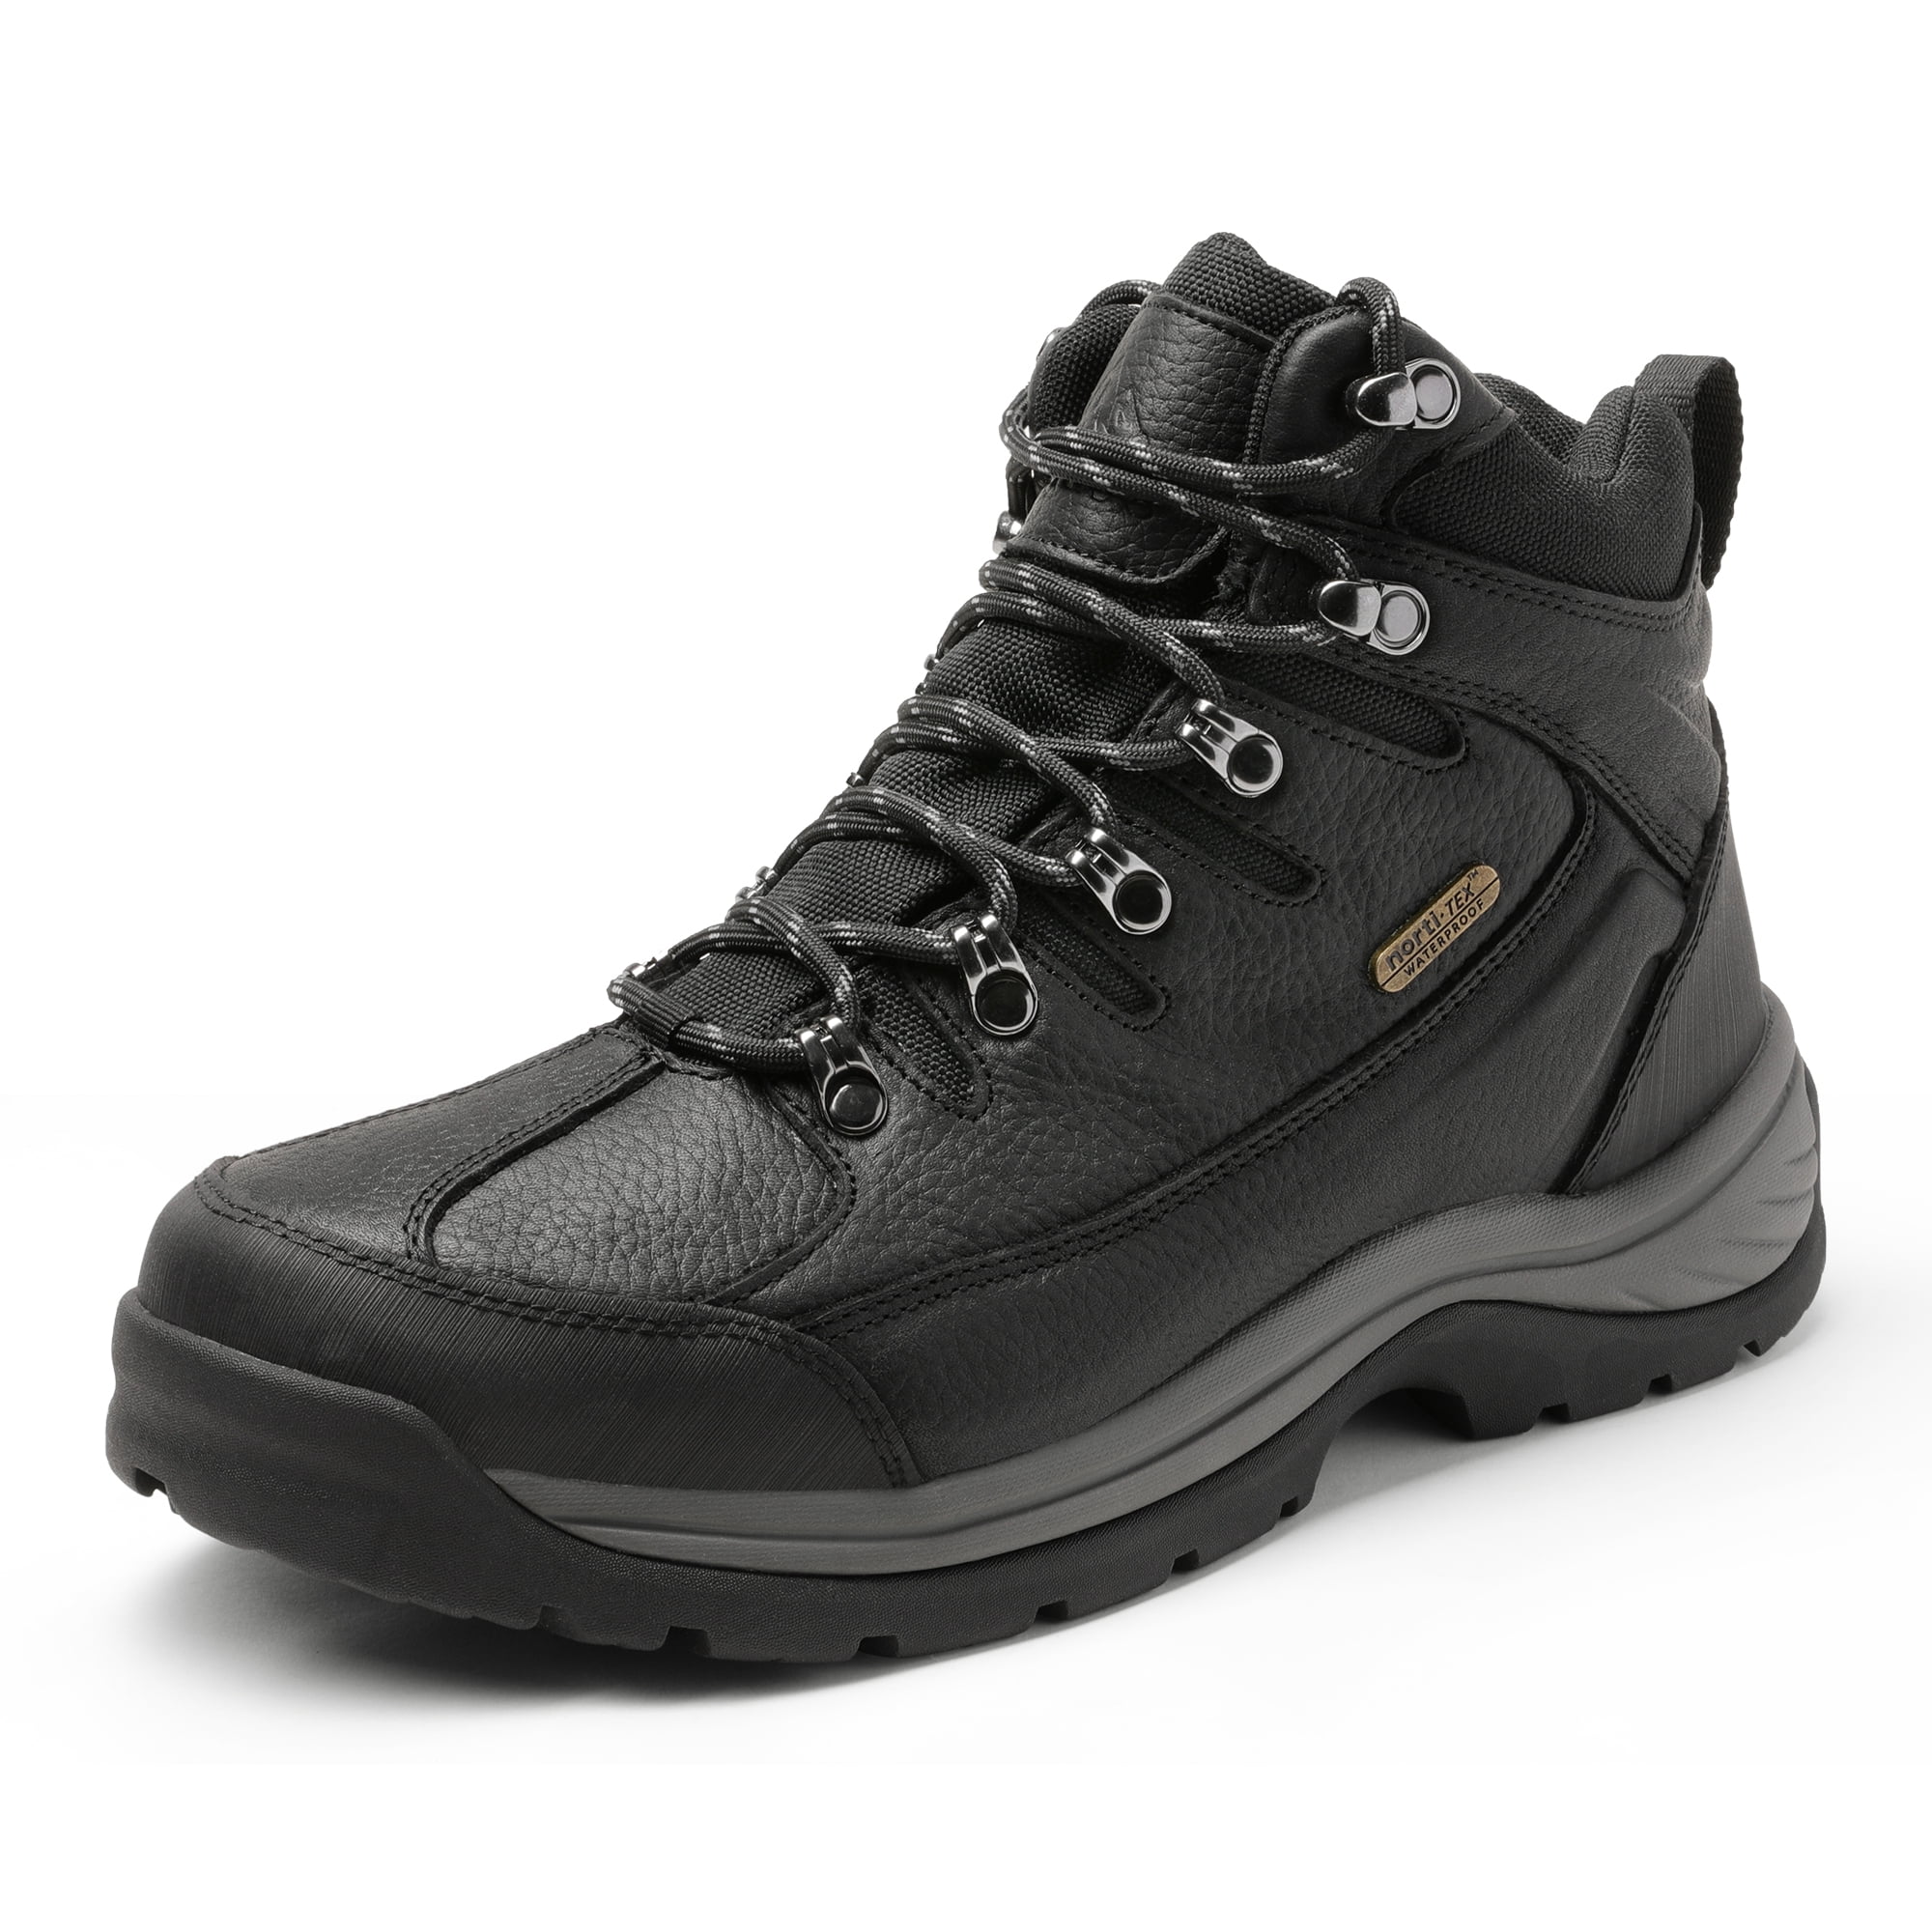 Mens Leather Work Safety Indestructible Shoes Steel Toe Waterproof Midsole Boots 